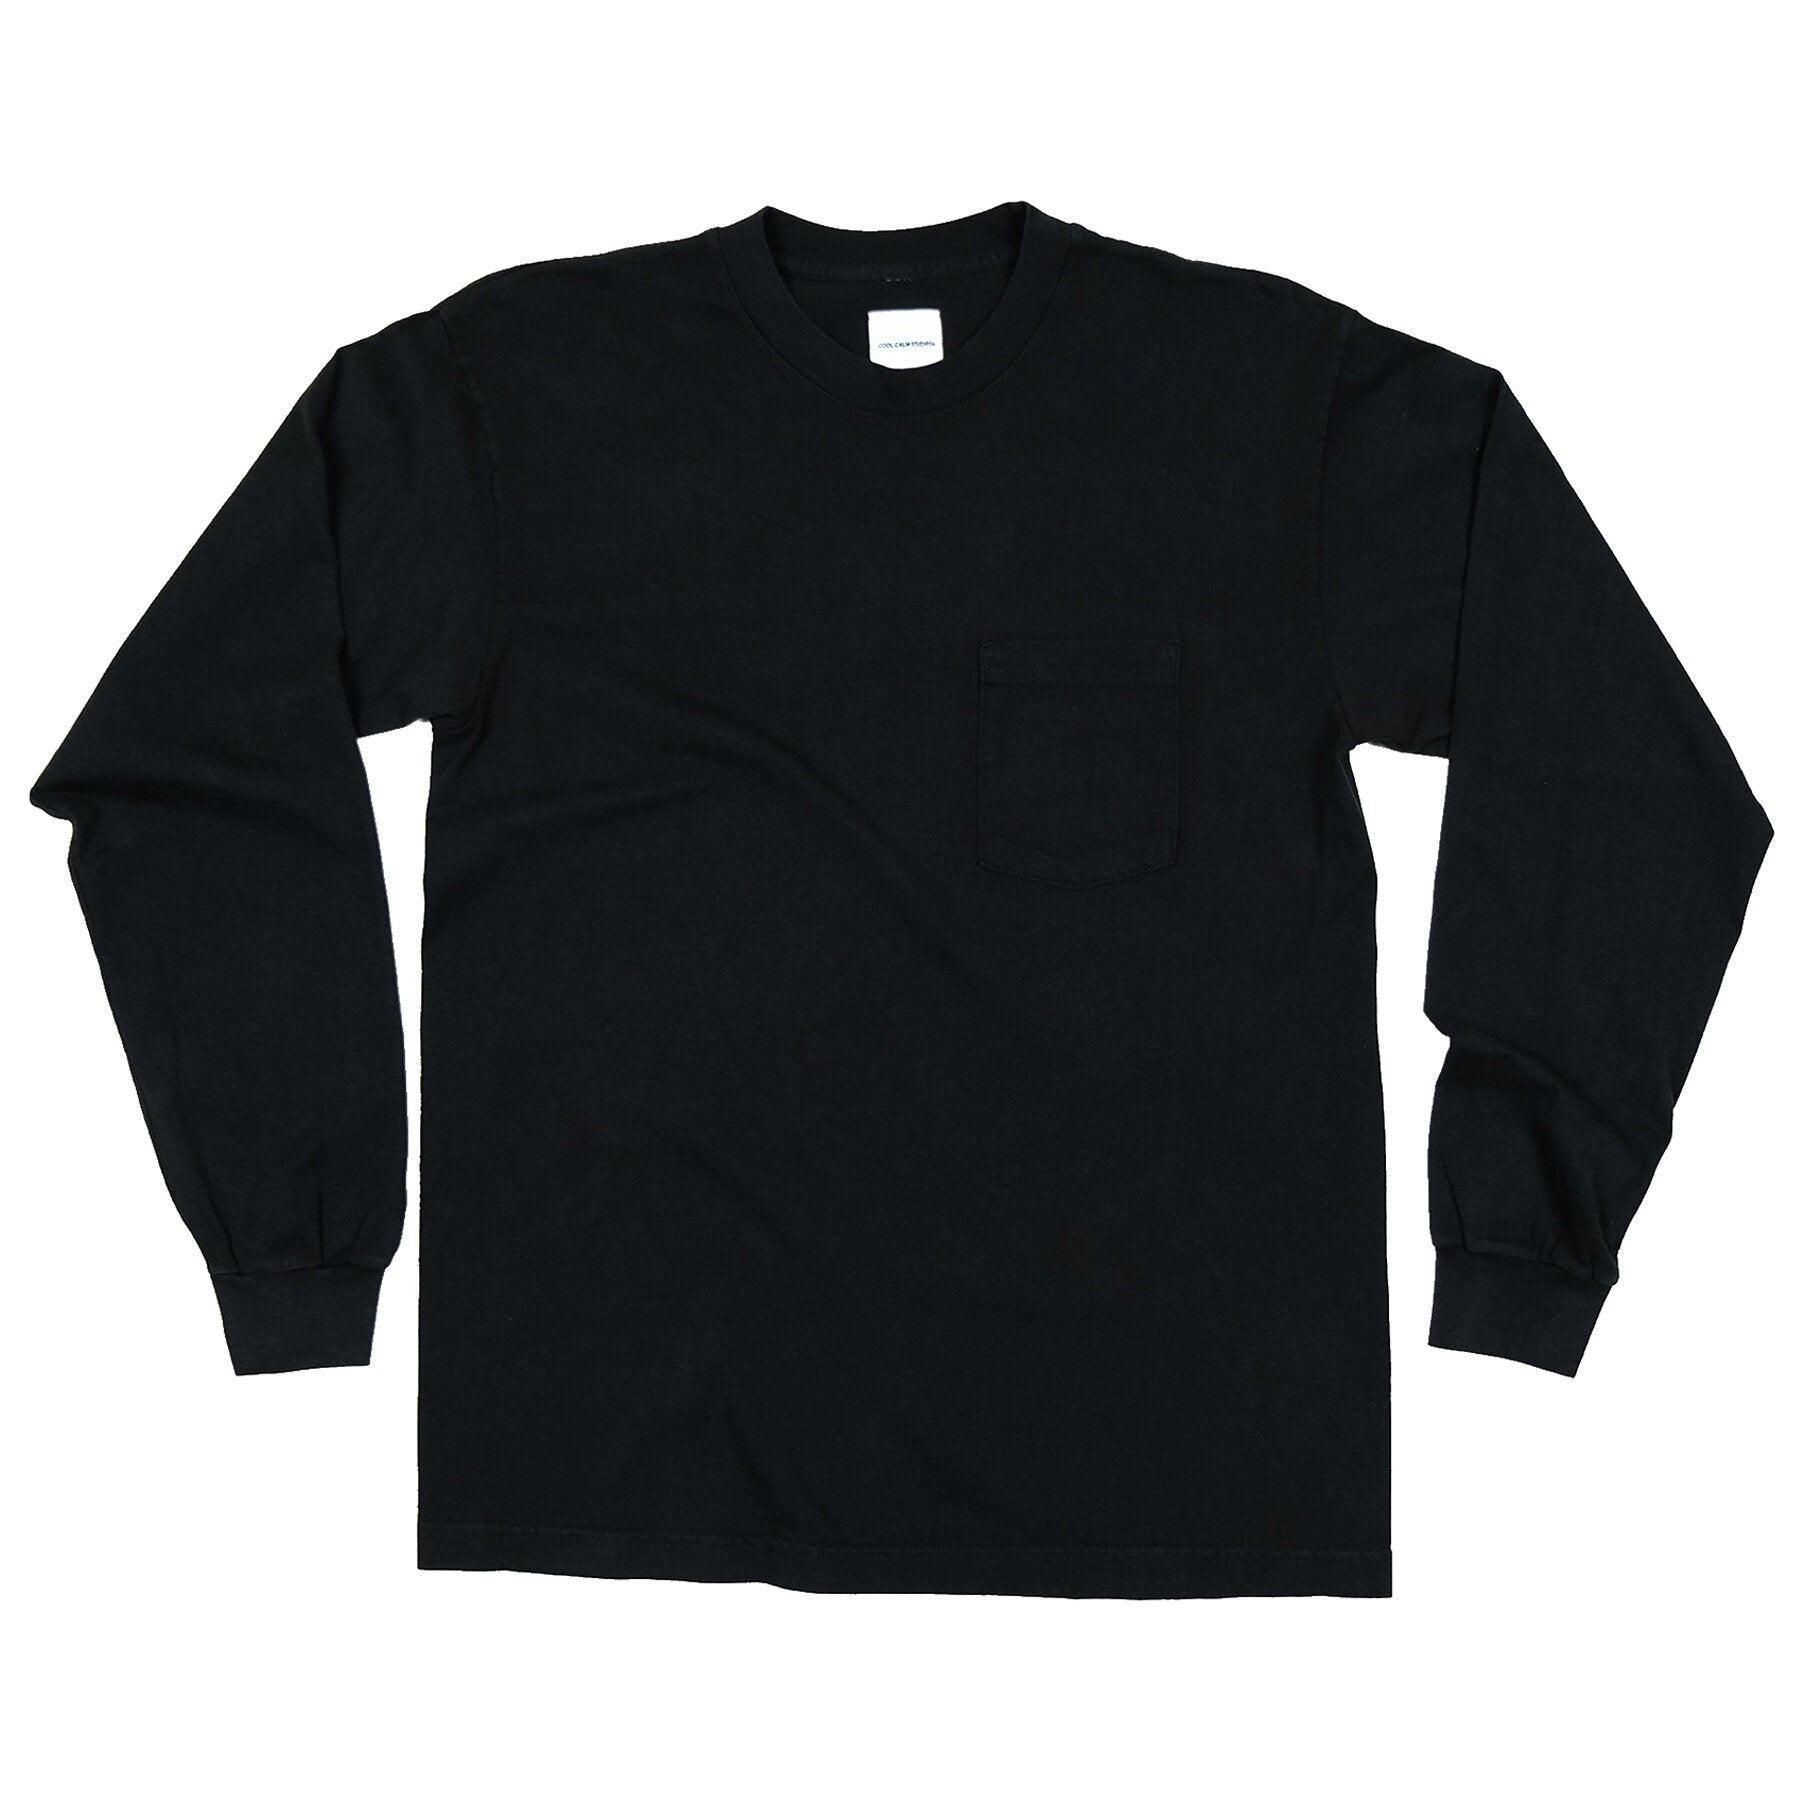 Any More ?'s L/S Pocket Tee